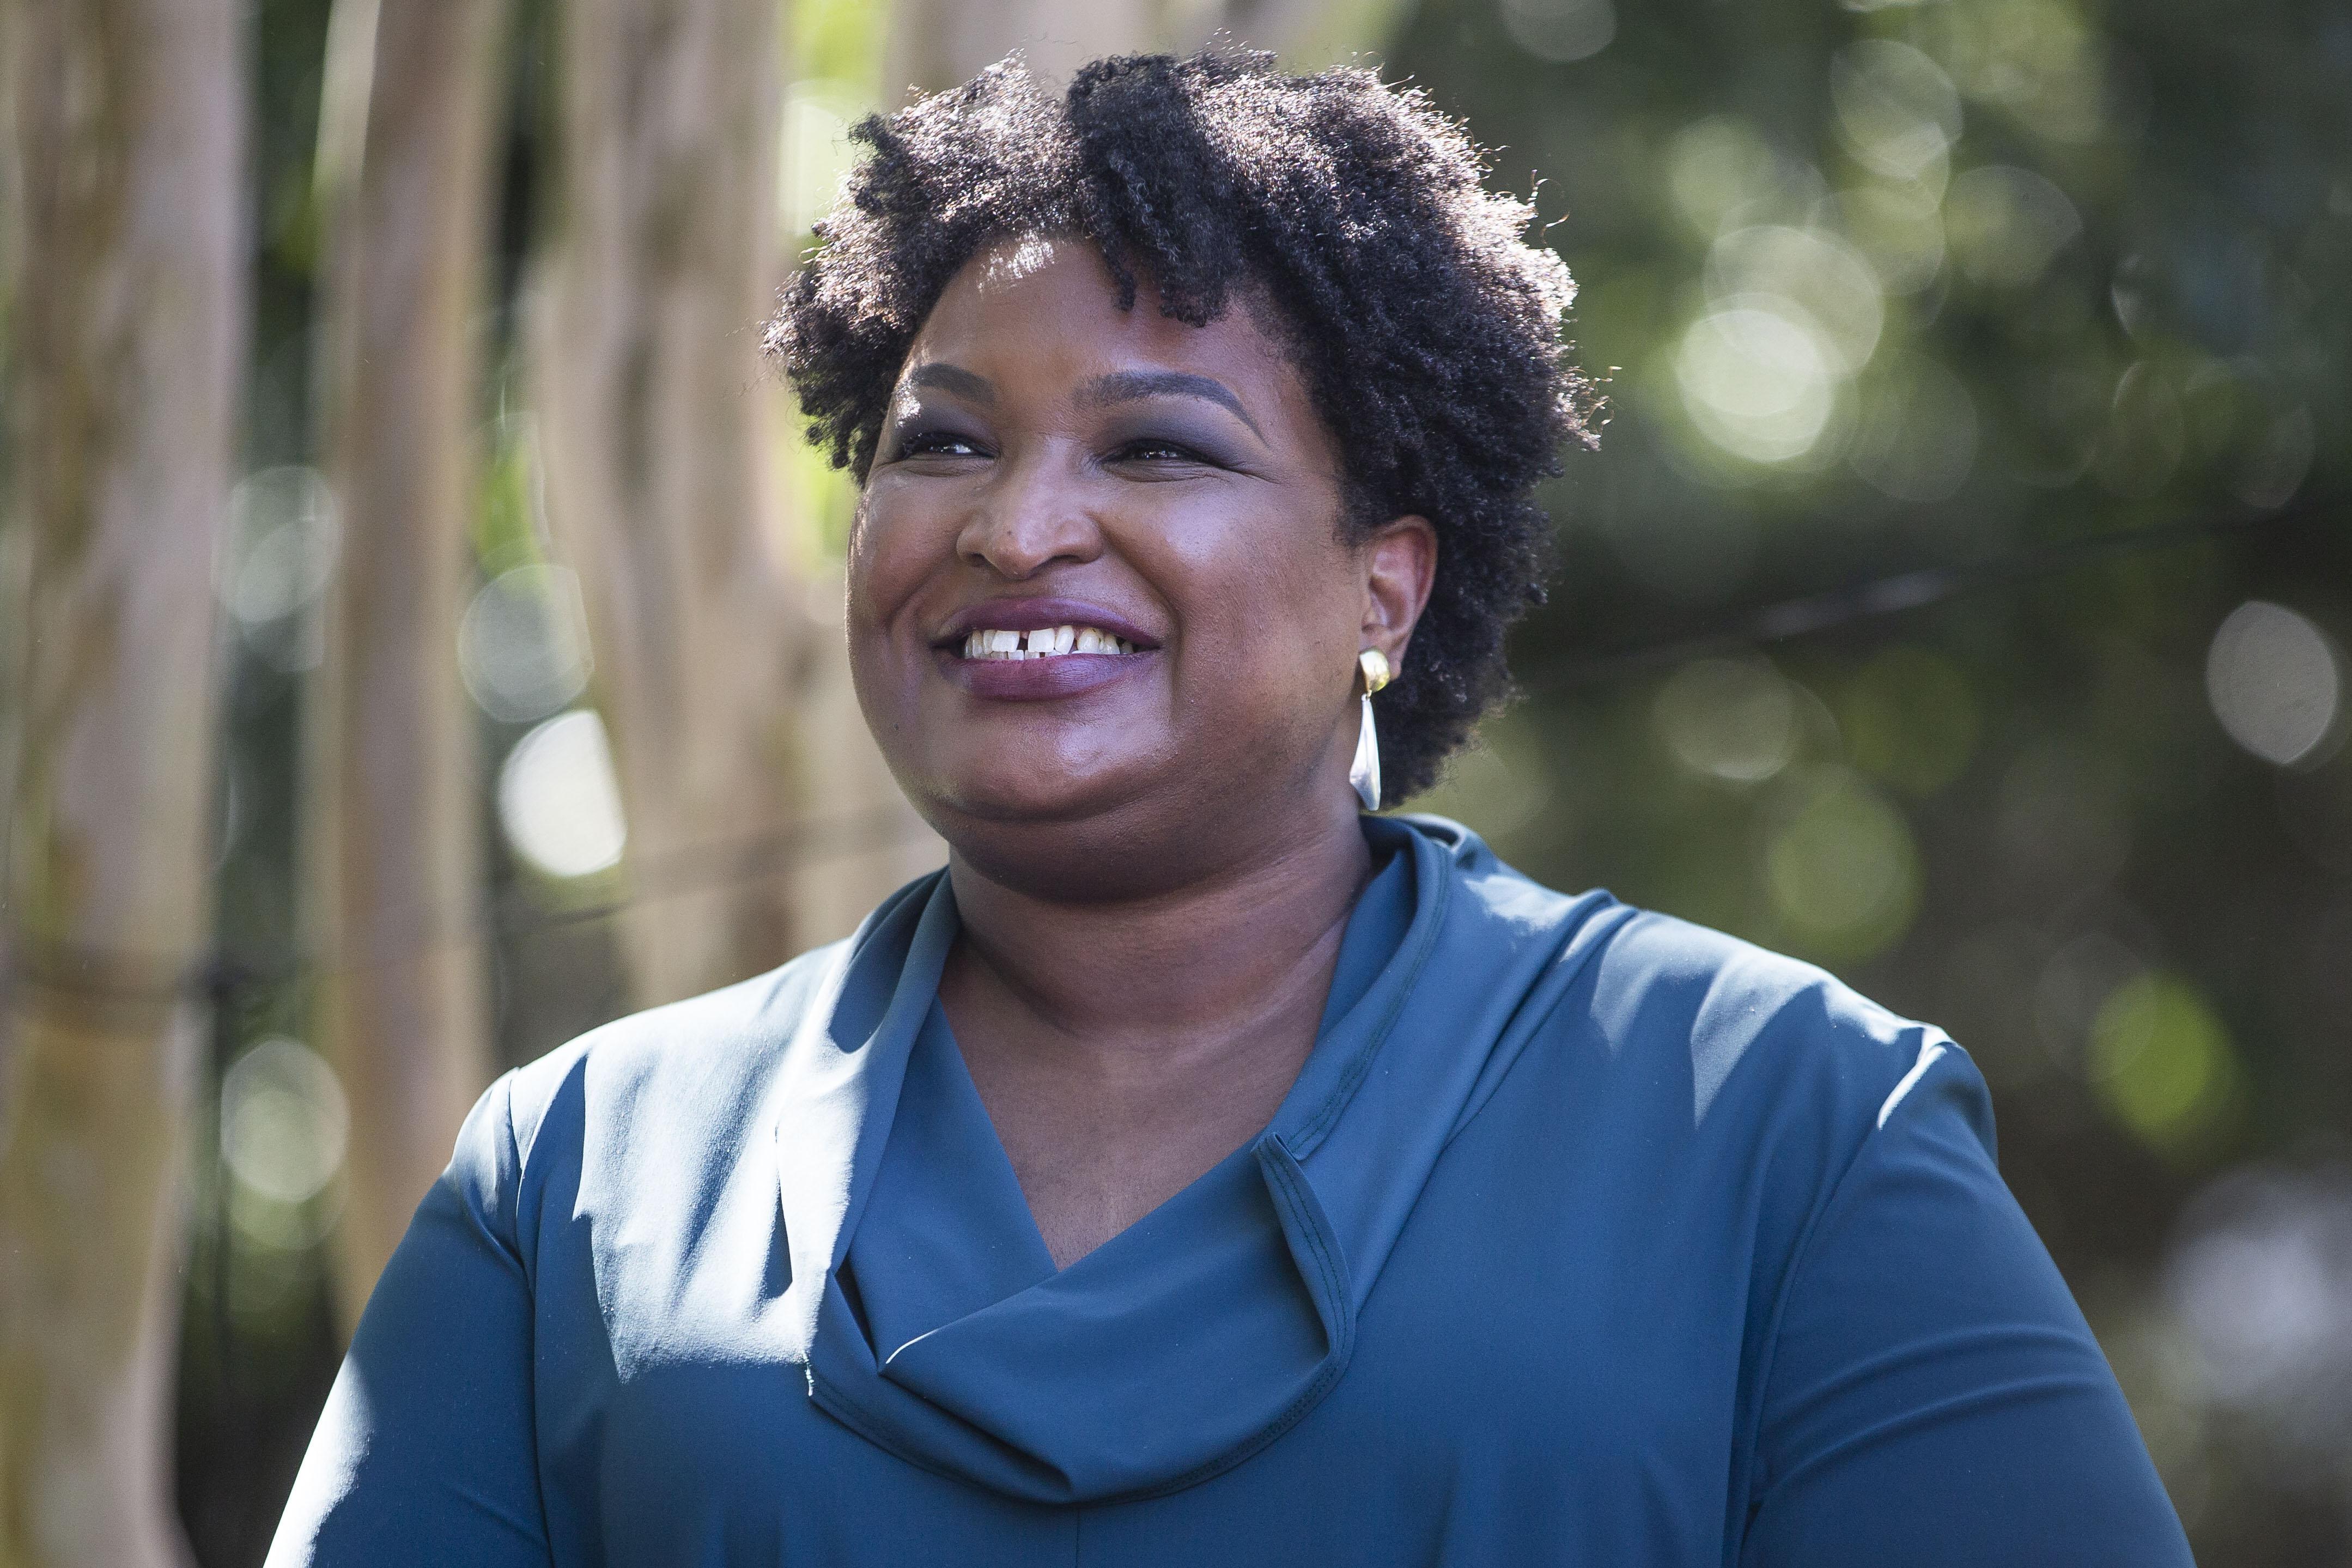 Stacey Abrams in a cowl neck shirt smiling outside